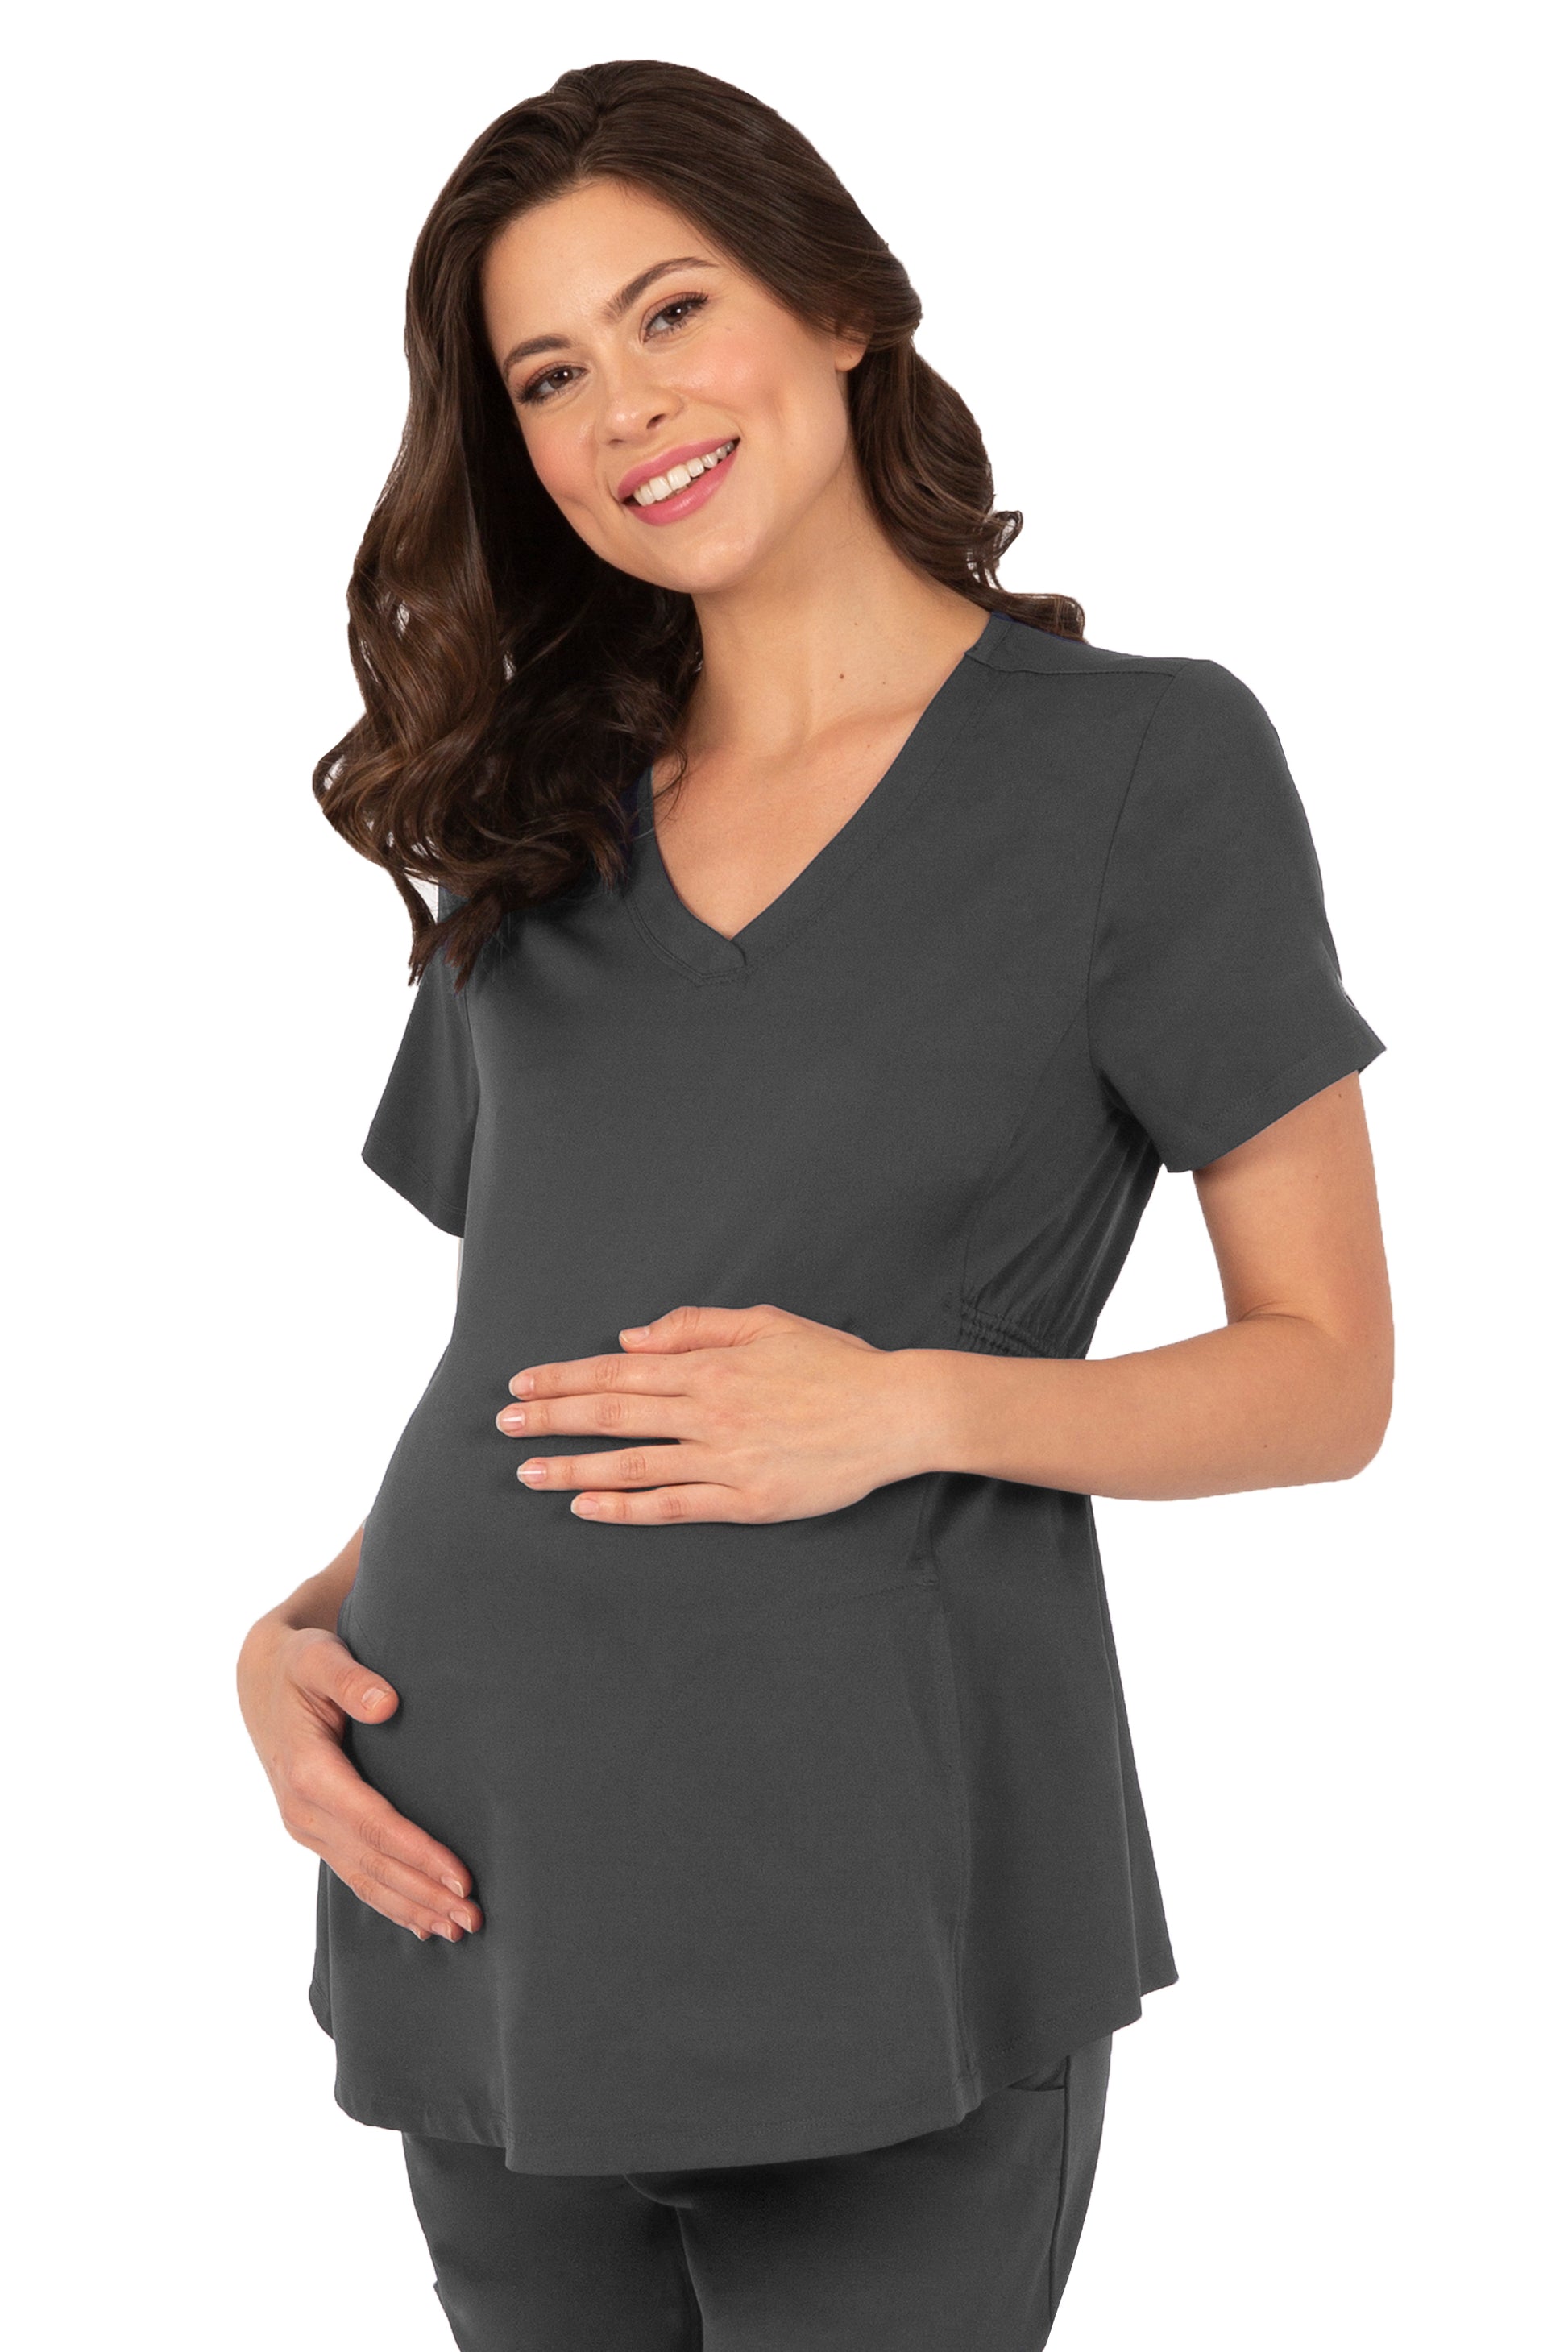 Healing Hands HHWorks 2510 Mila Maternity Top Pewter